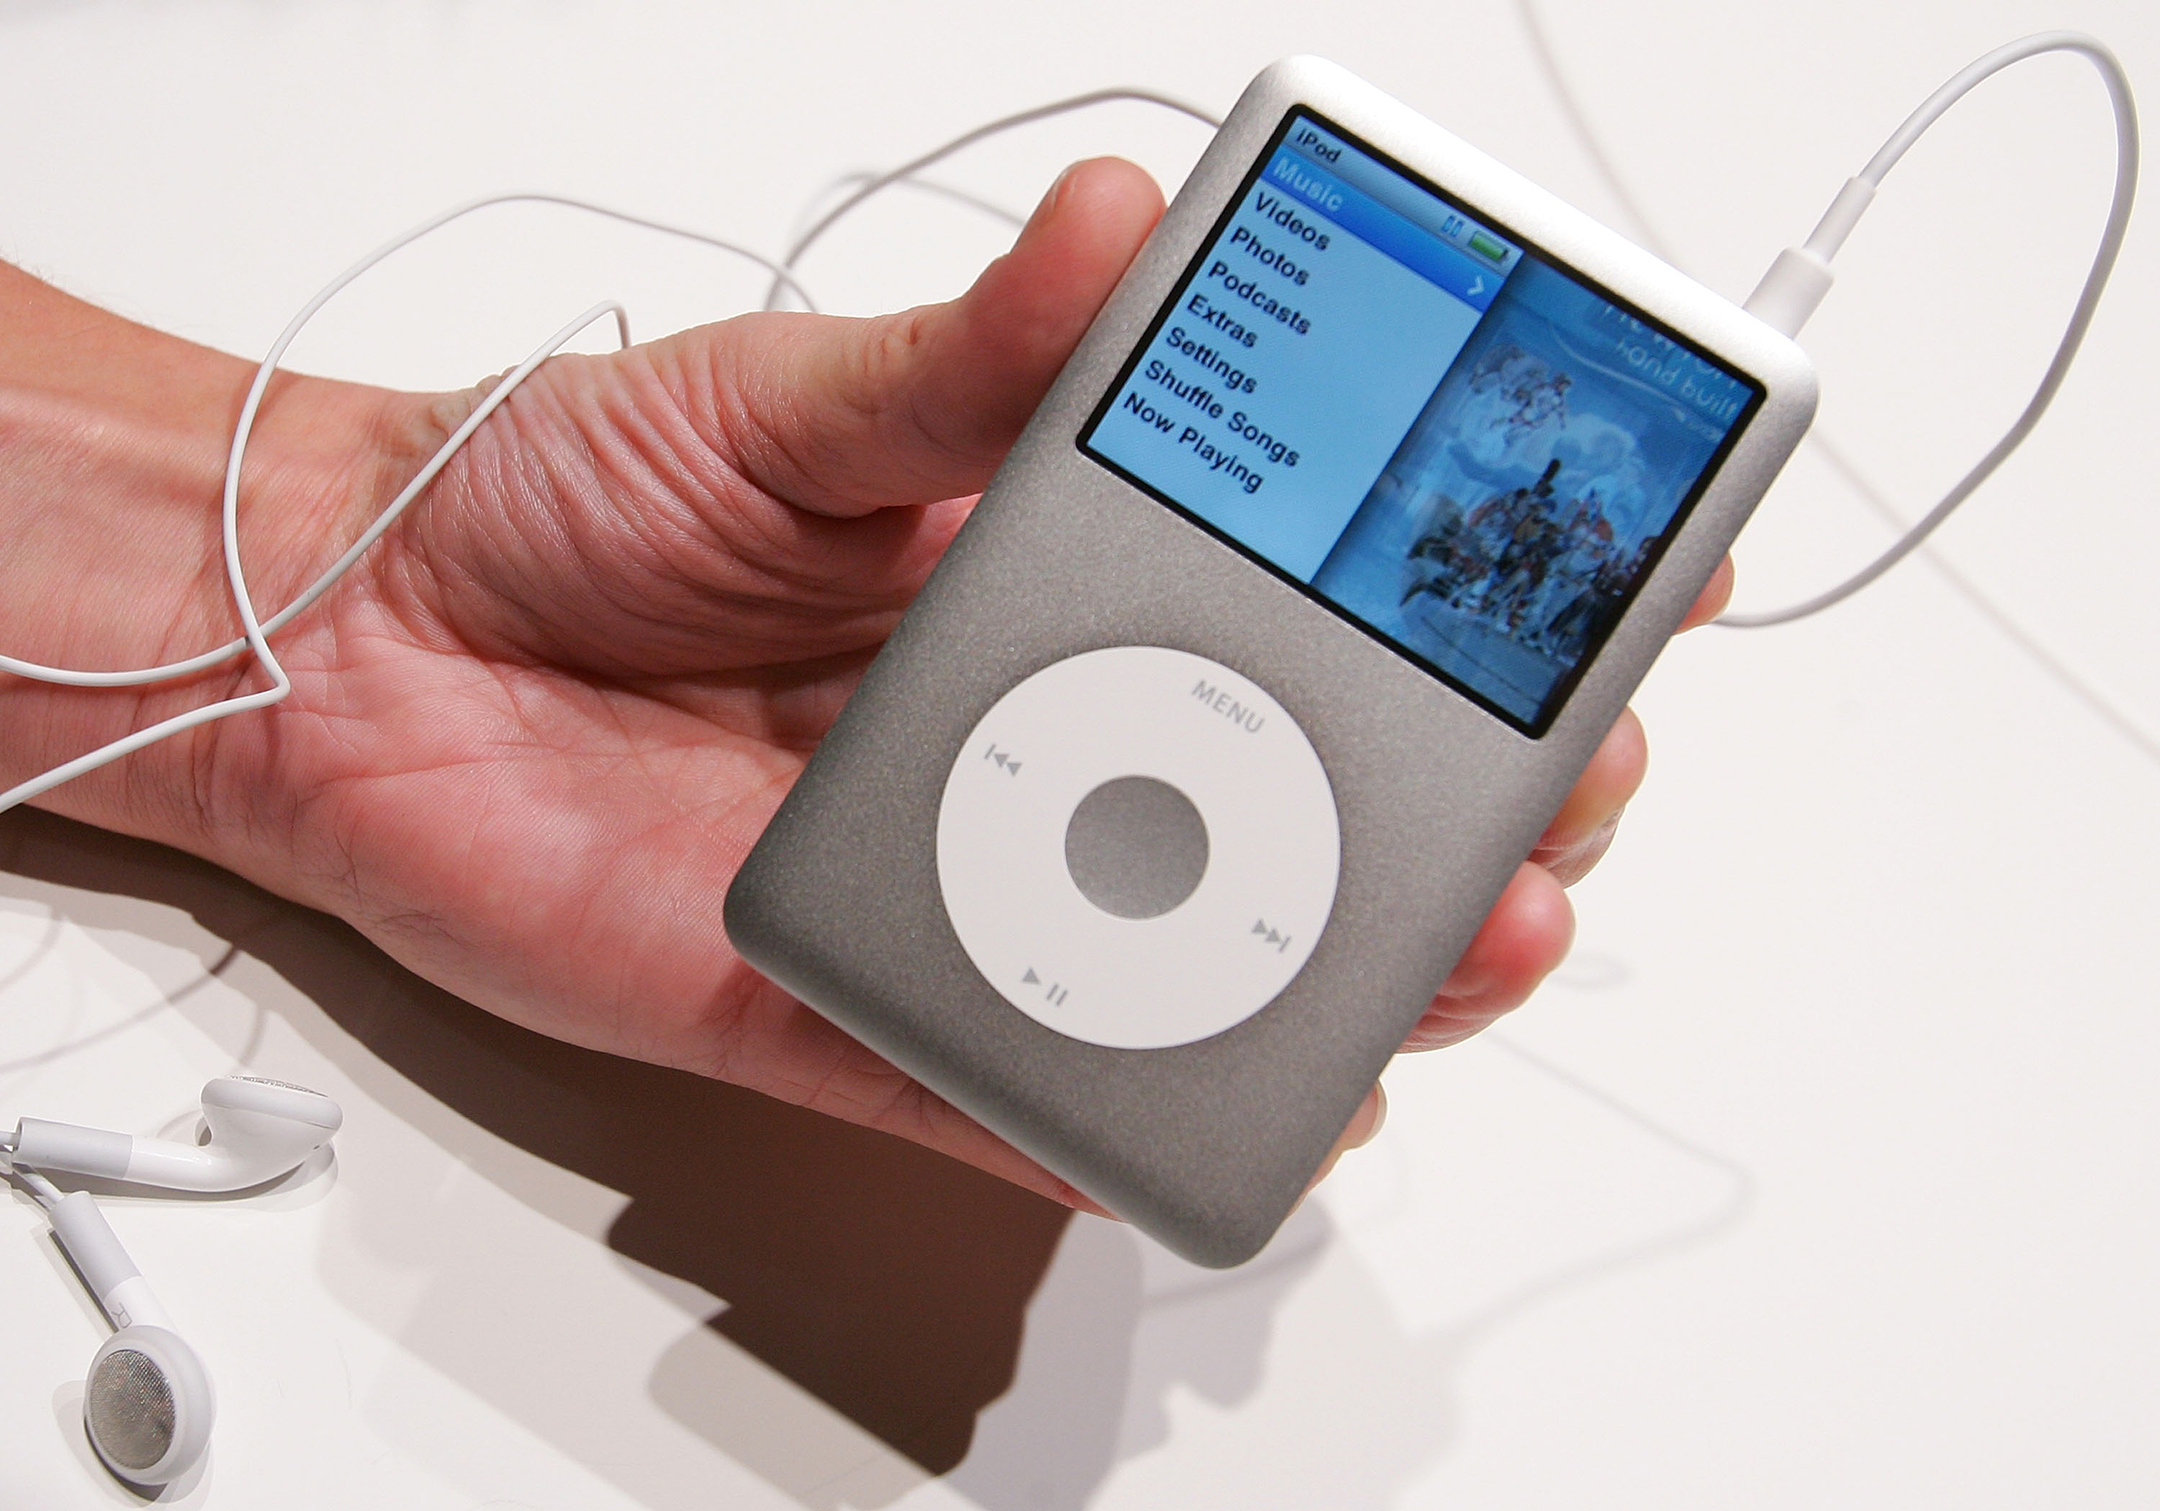 Hand holding an iPod with earphone cable attached